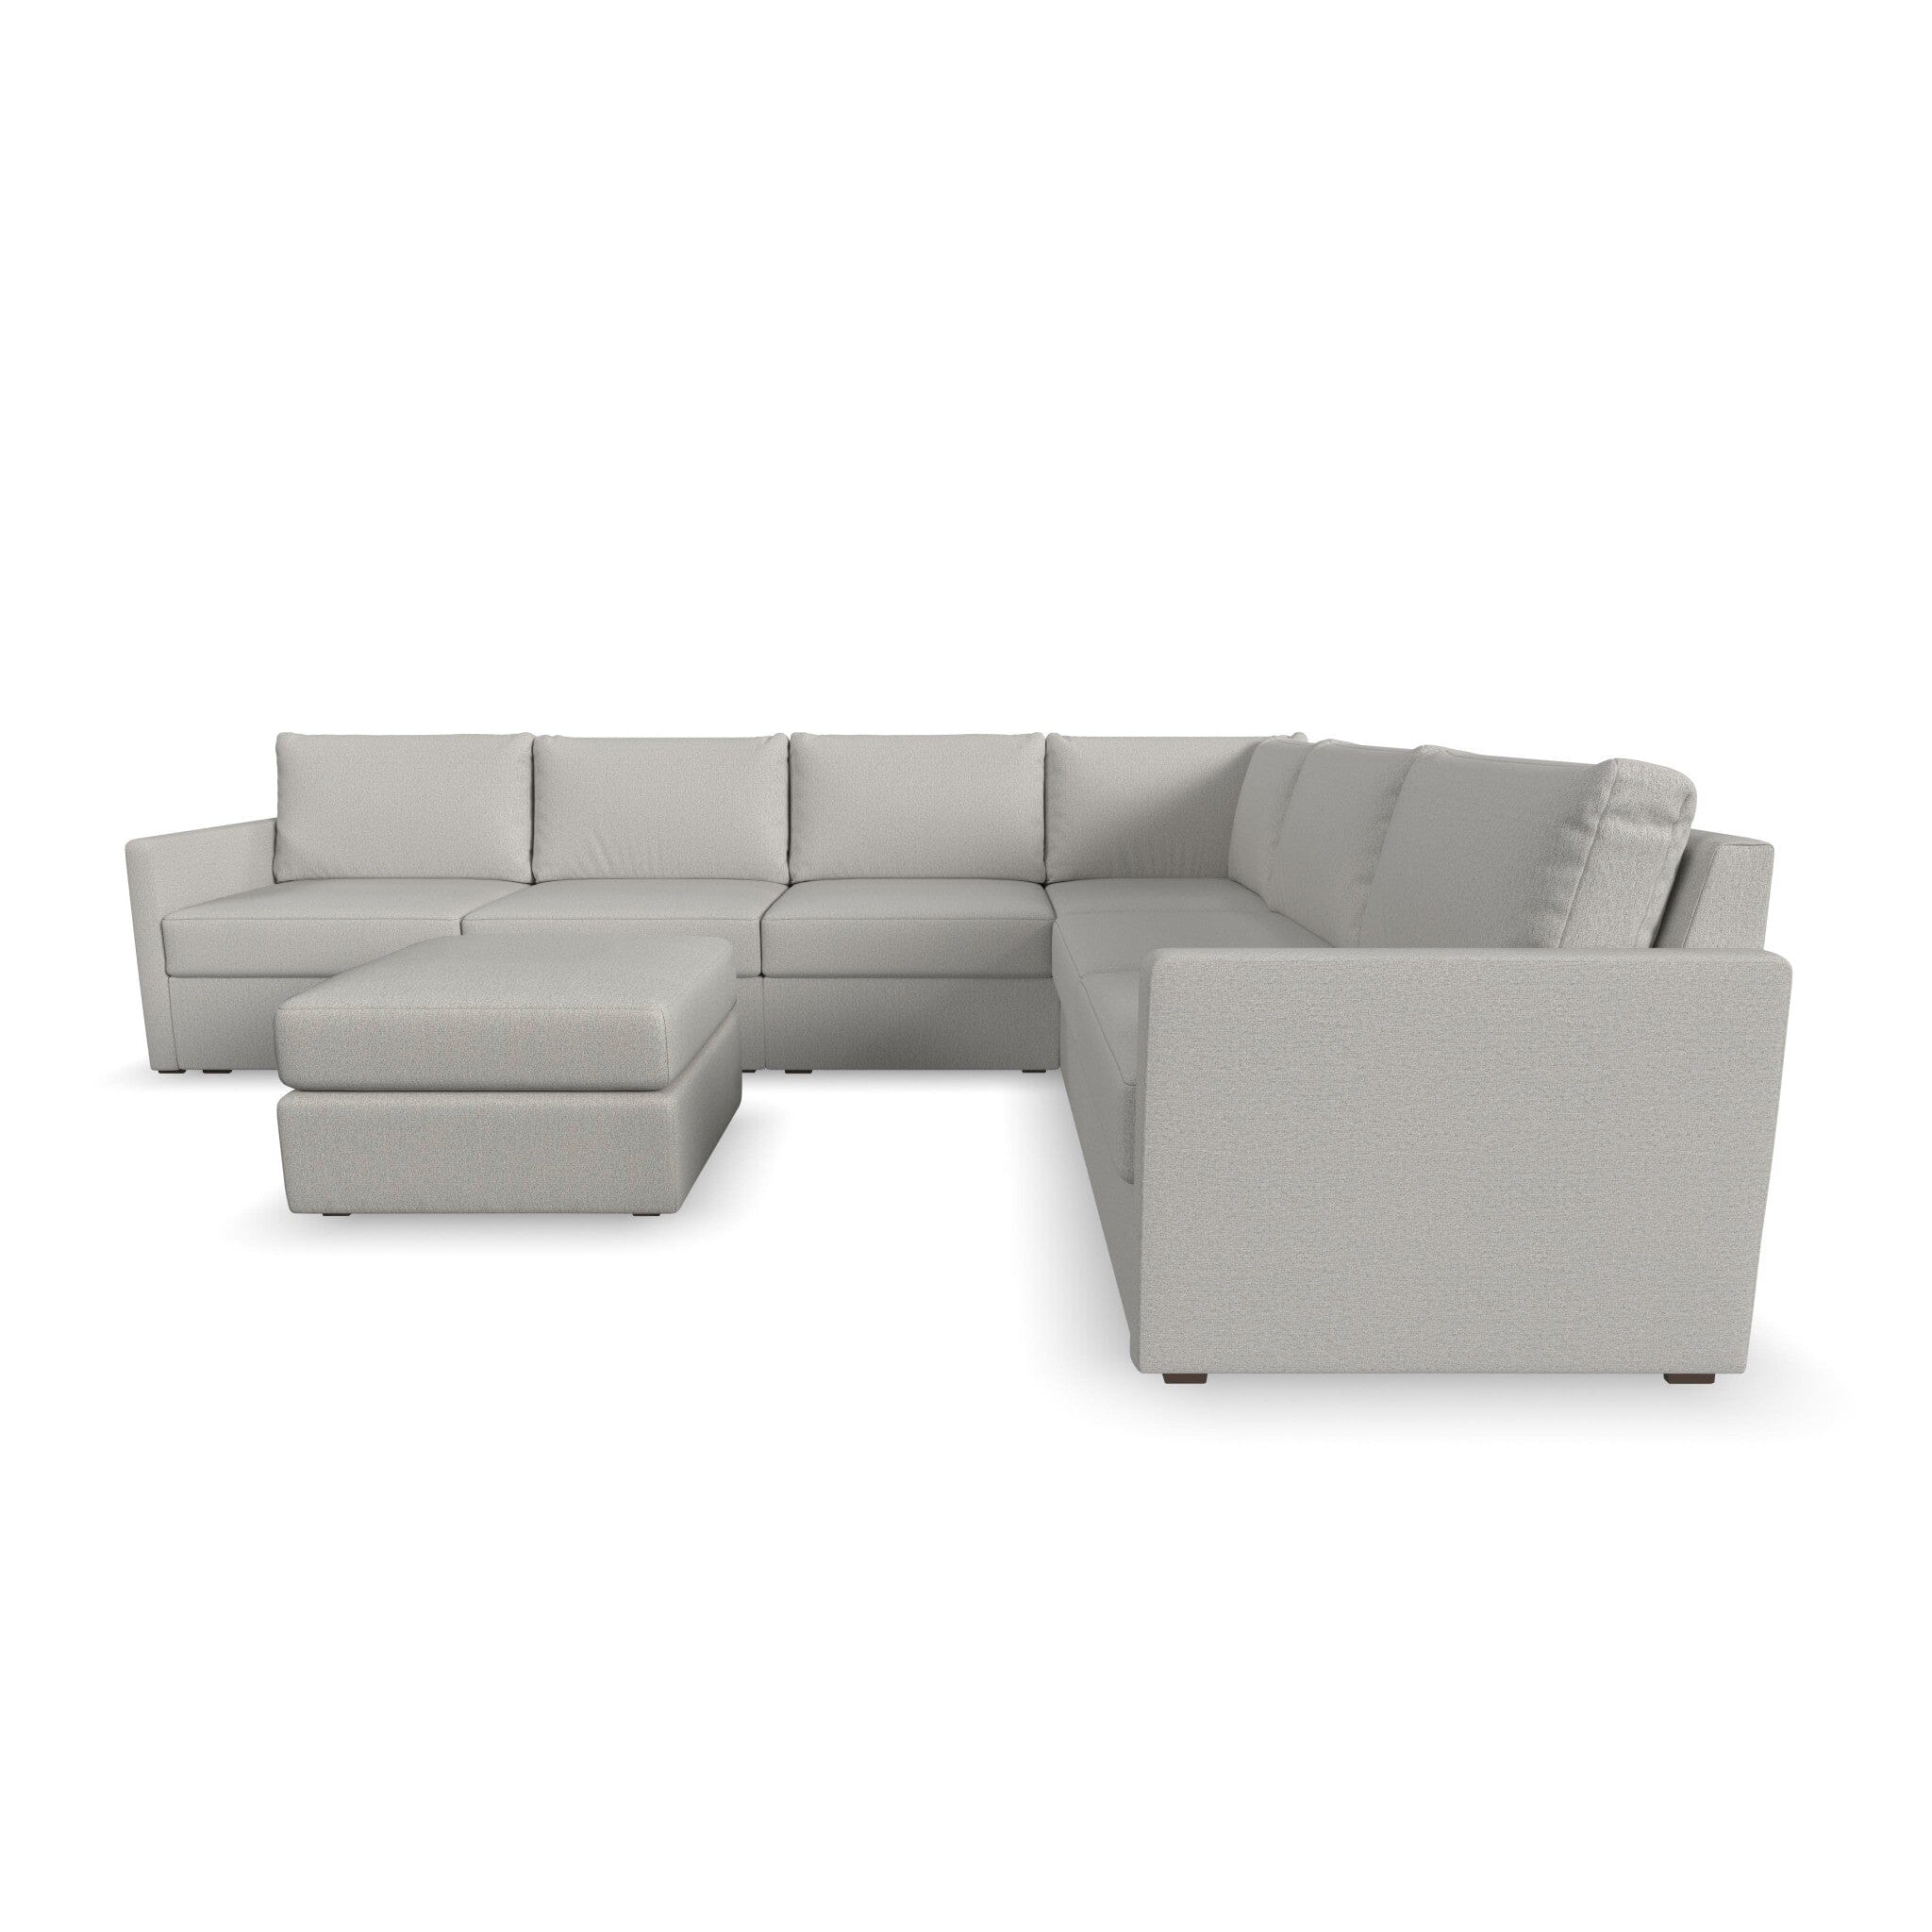 Traditional 6-Seat Sectional with Narrow Arm and Ottoman By Flex Sectional Flex